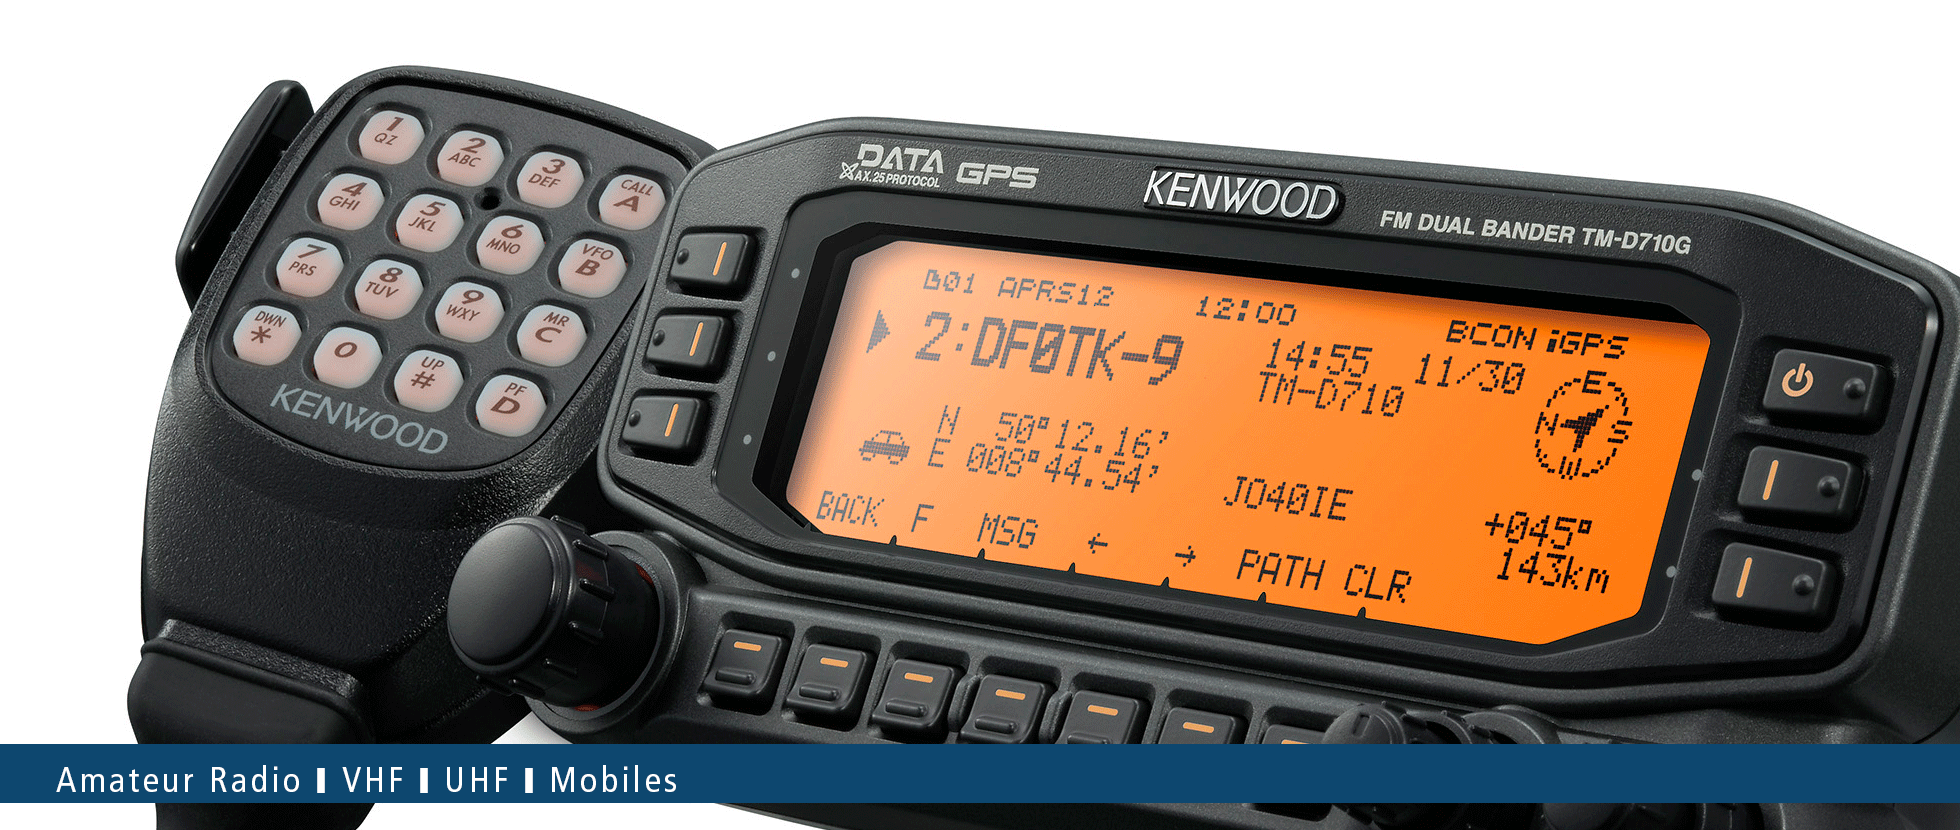 Mobiles • TM-D710GE Features • Kenwood Comms